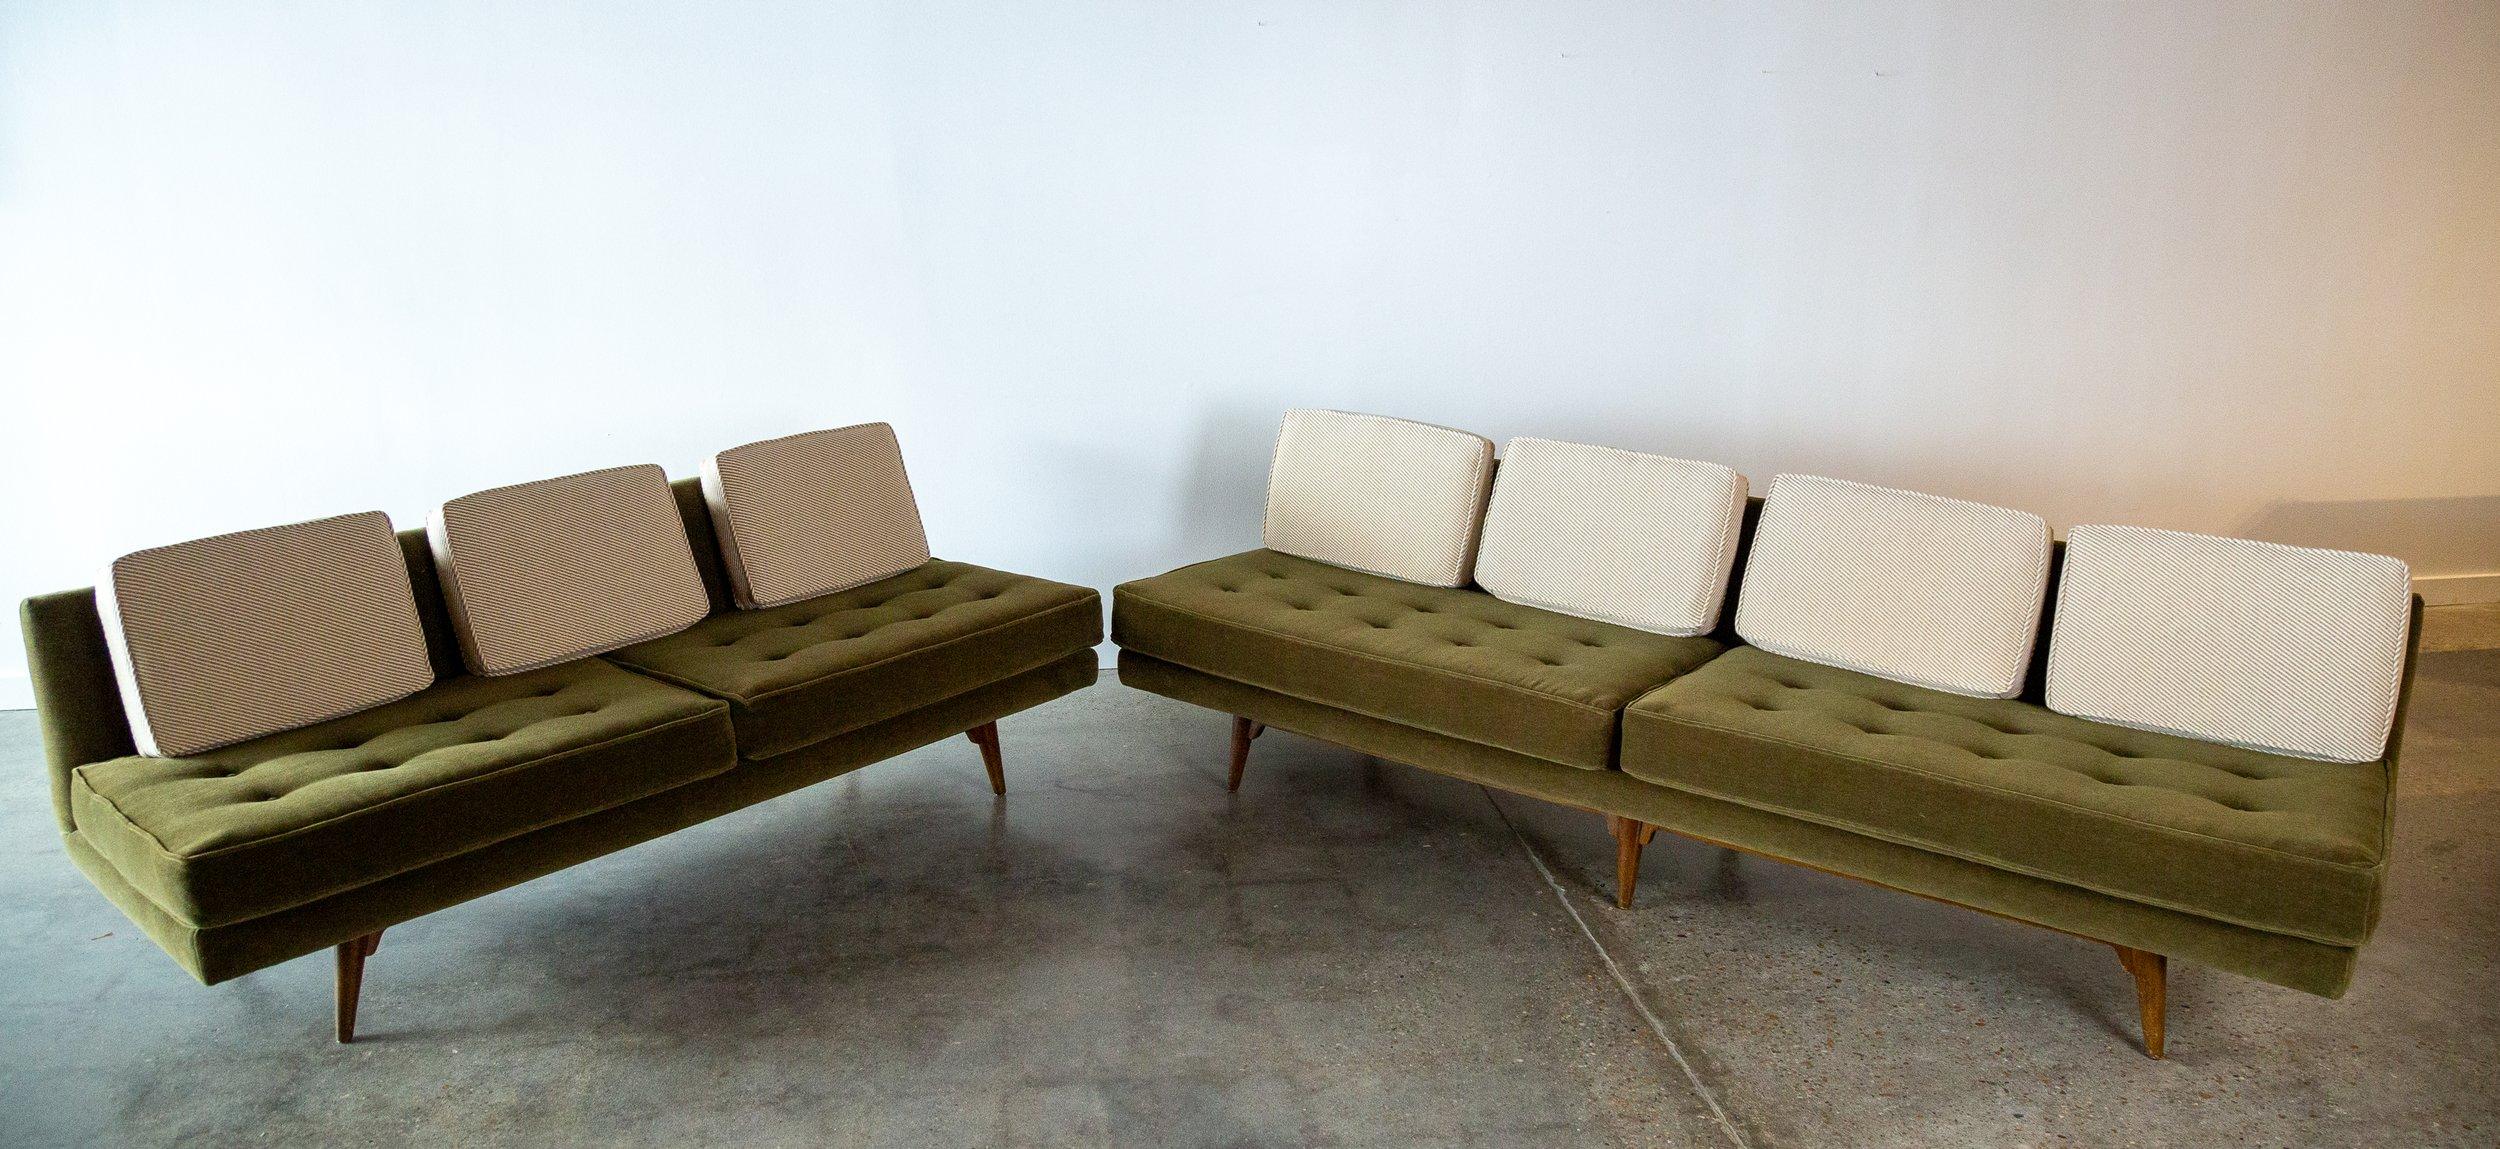 1950s L Shaped Edward Wormley for Dunbar 5526 sectional (2 sofas) Mohair and Woo In Good Condition In Virginia Beach, VA